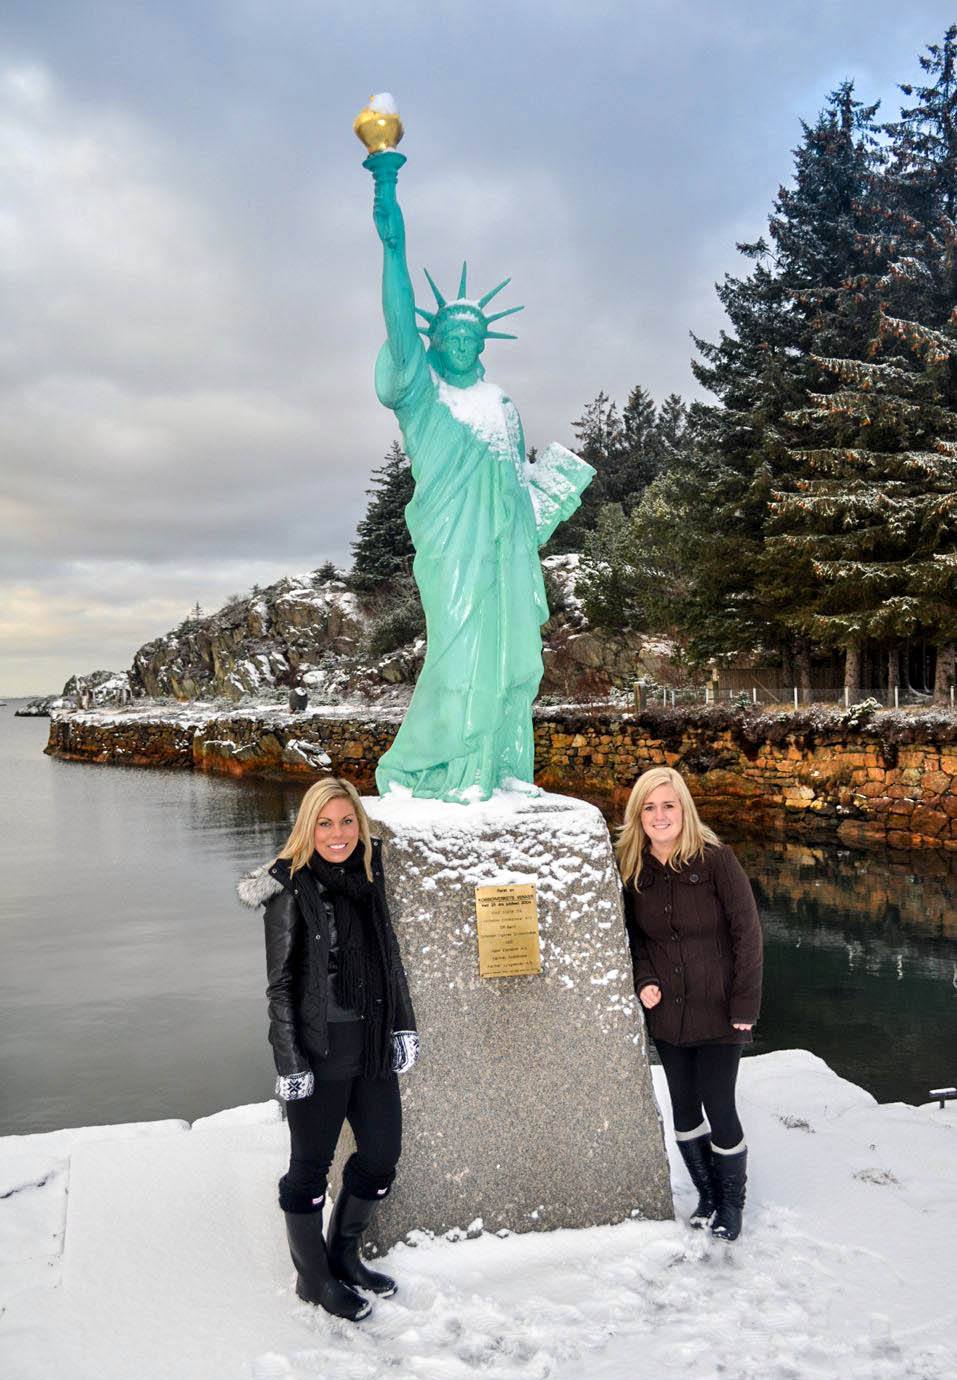 Statue of Liberty's birthplace in Visnes, Norway